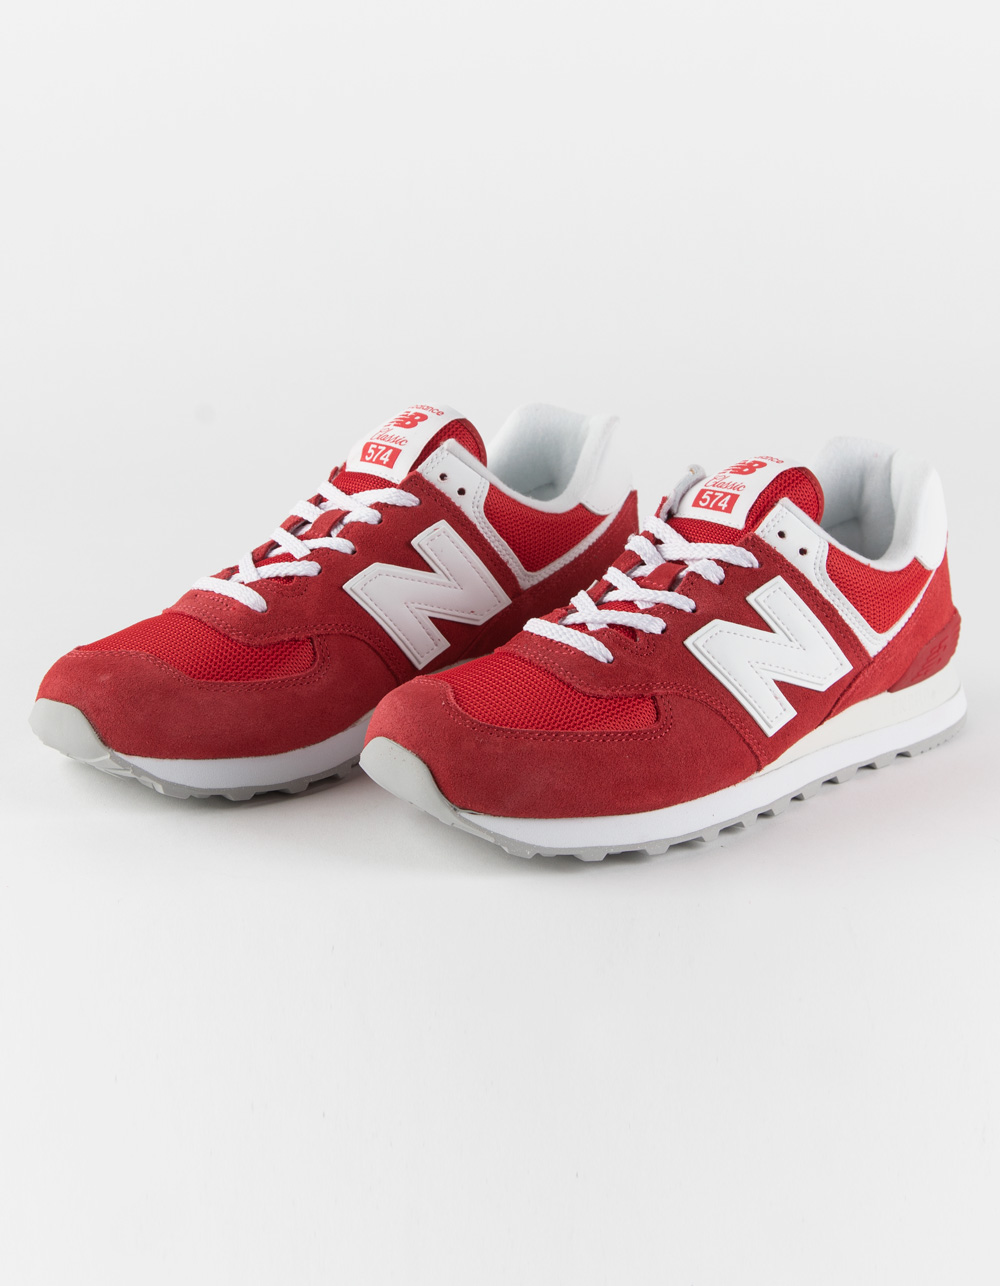 NEW BALANCE 574 Mens Shoes - RED/WHITE | Tillys